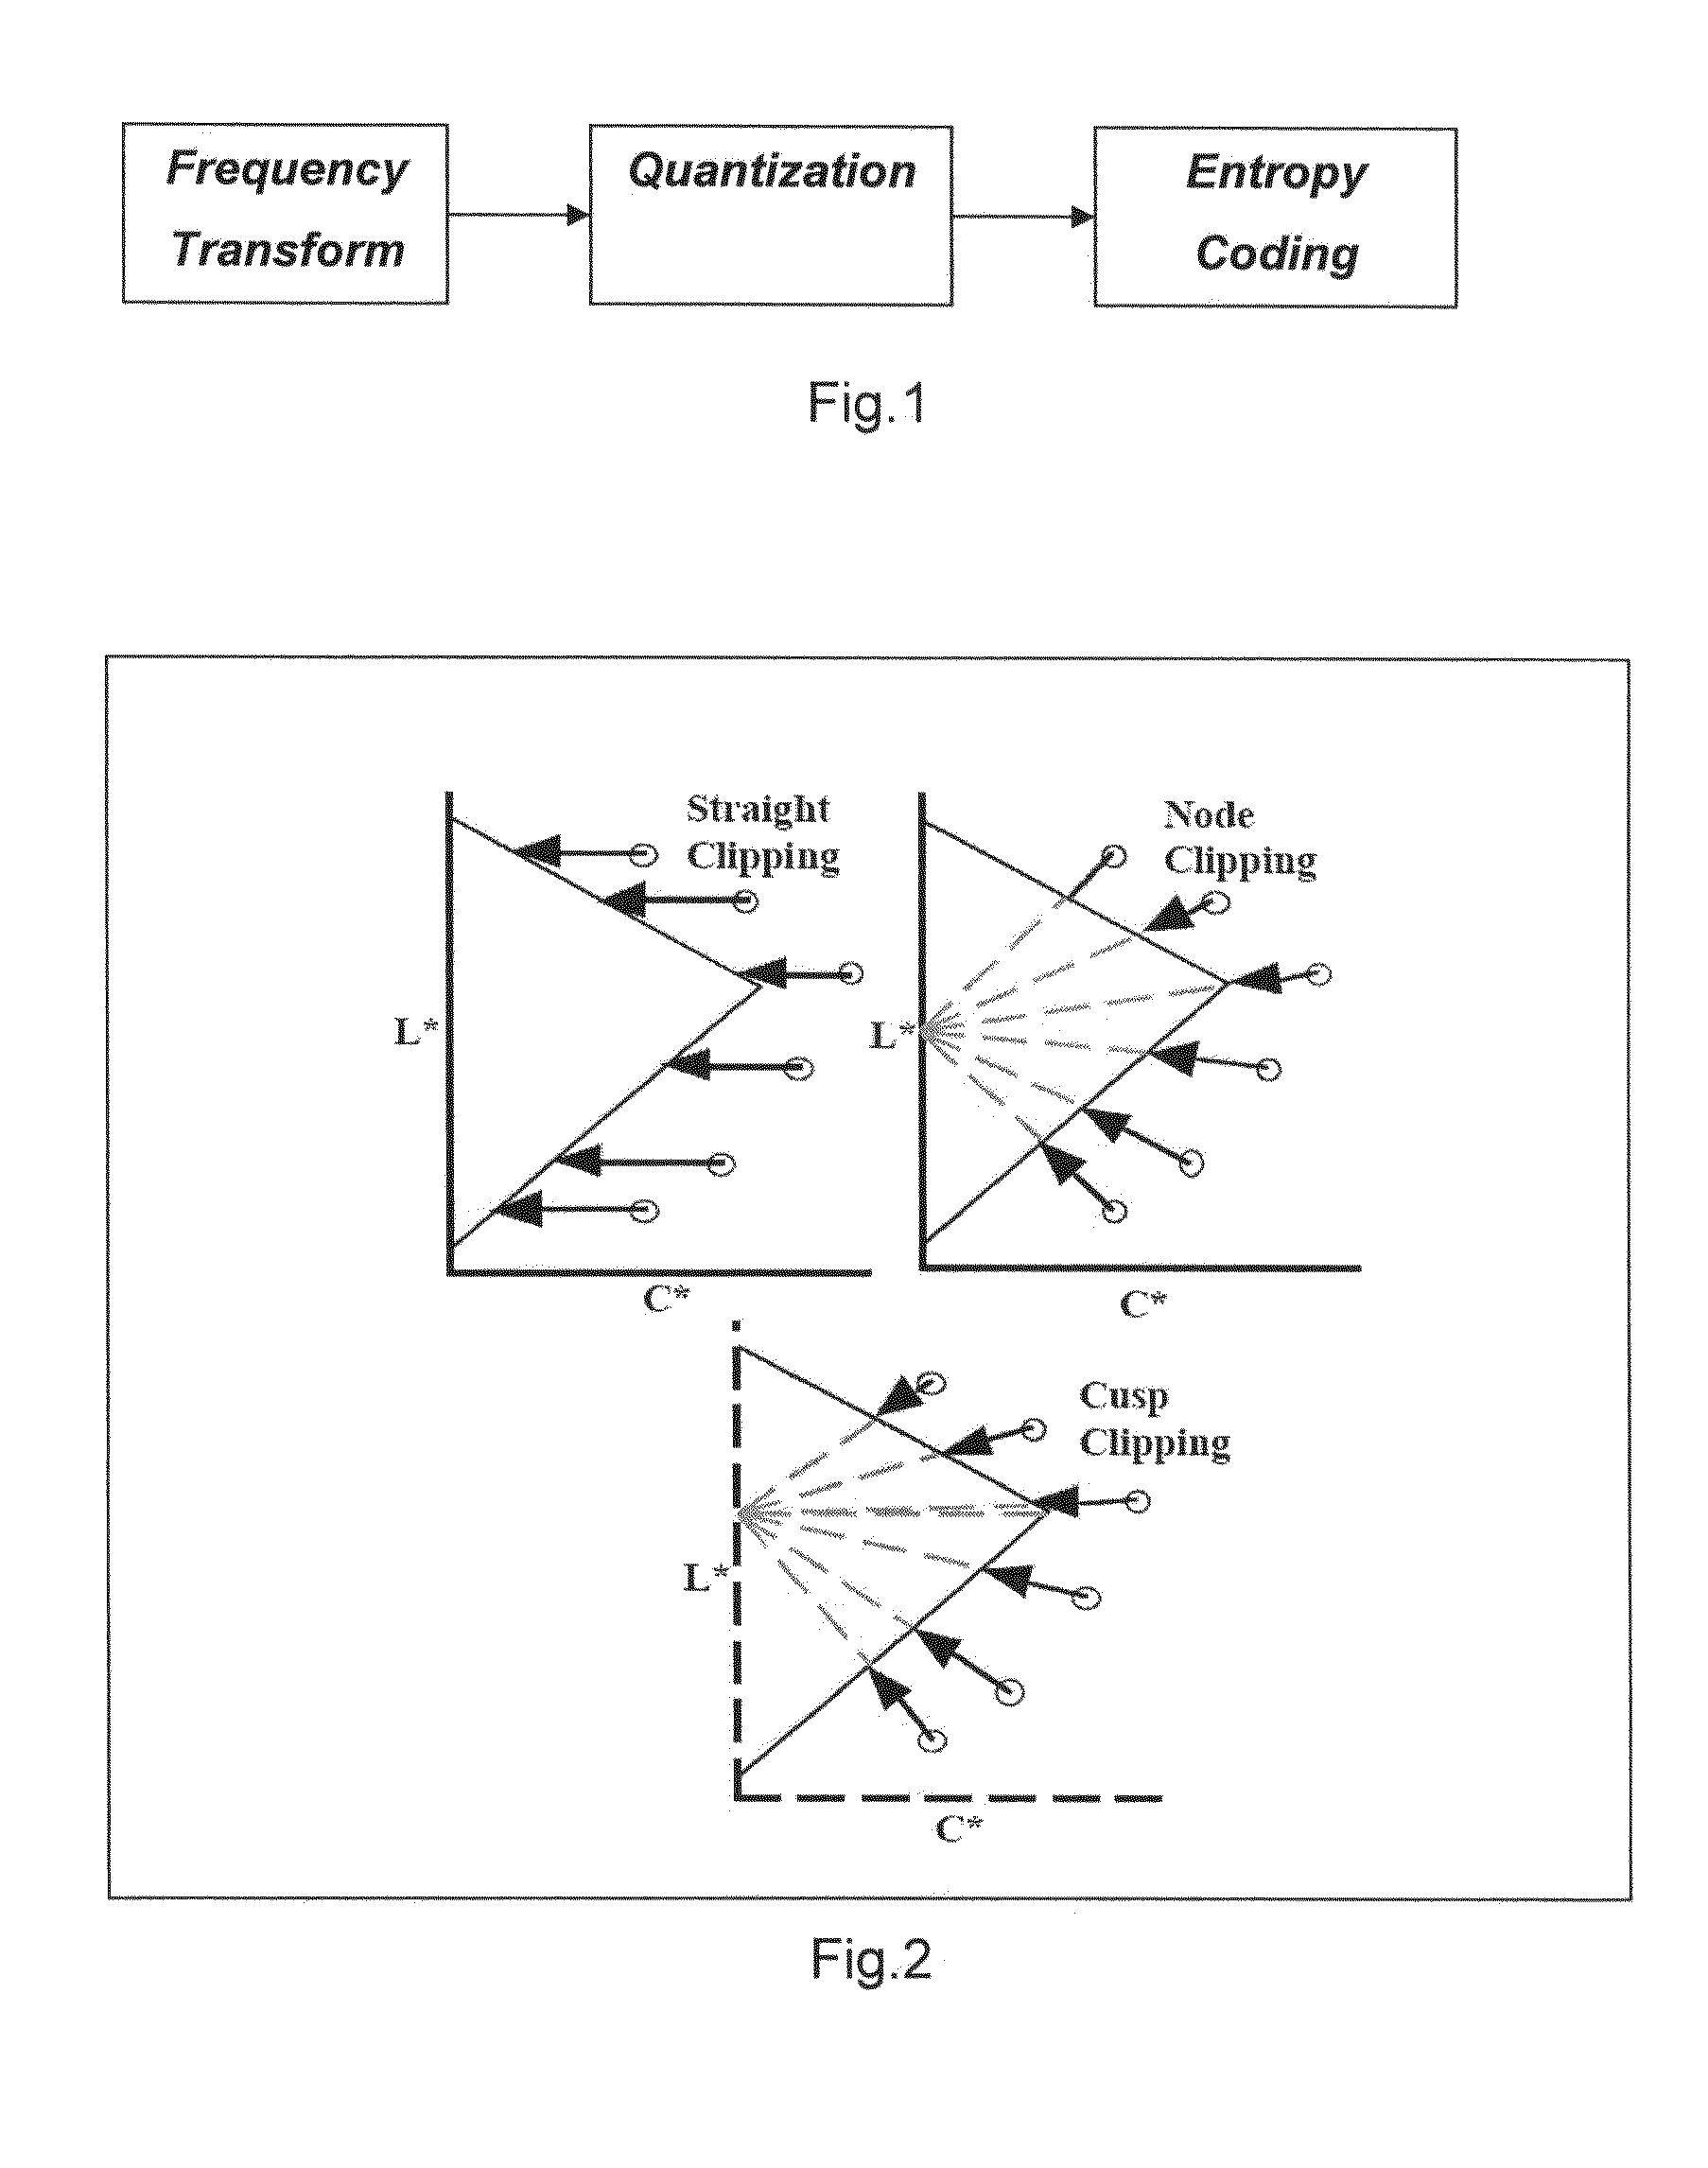 Method of processing of compressed image into a gamut mapped image using spatial frequency analysis